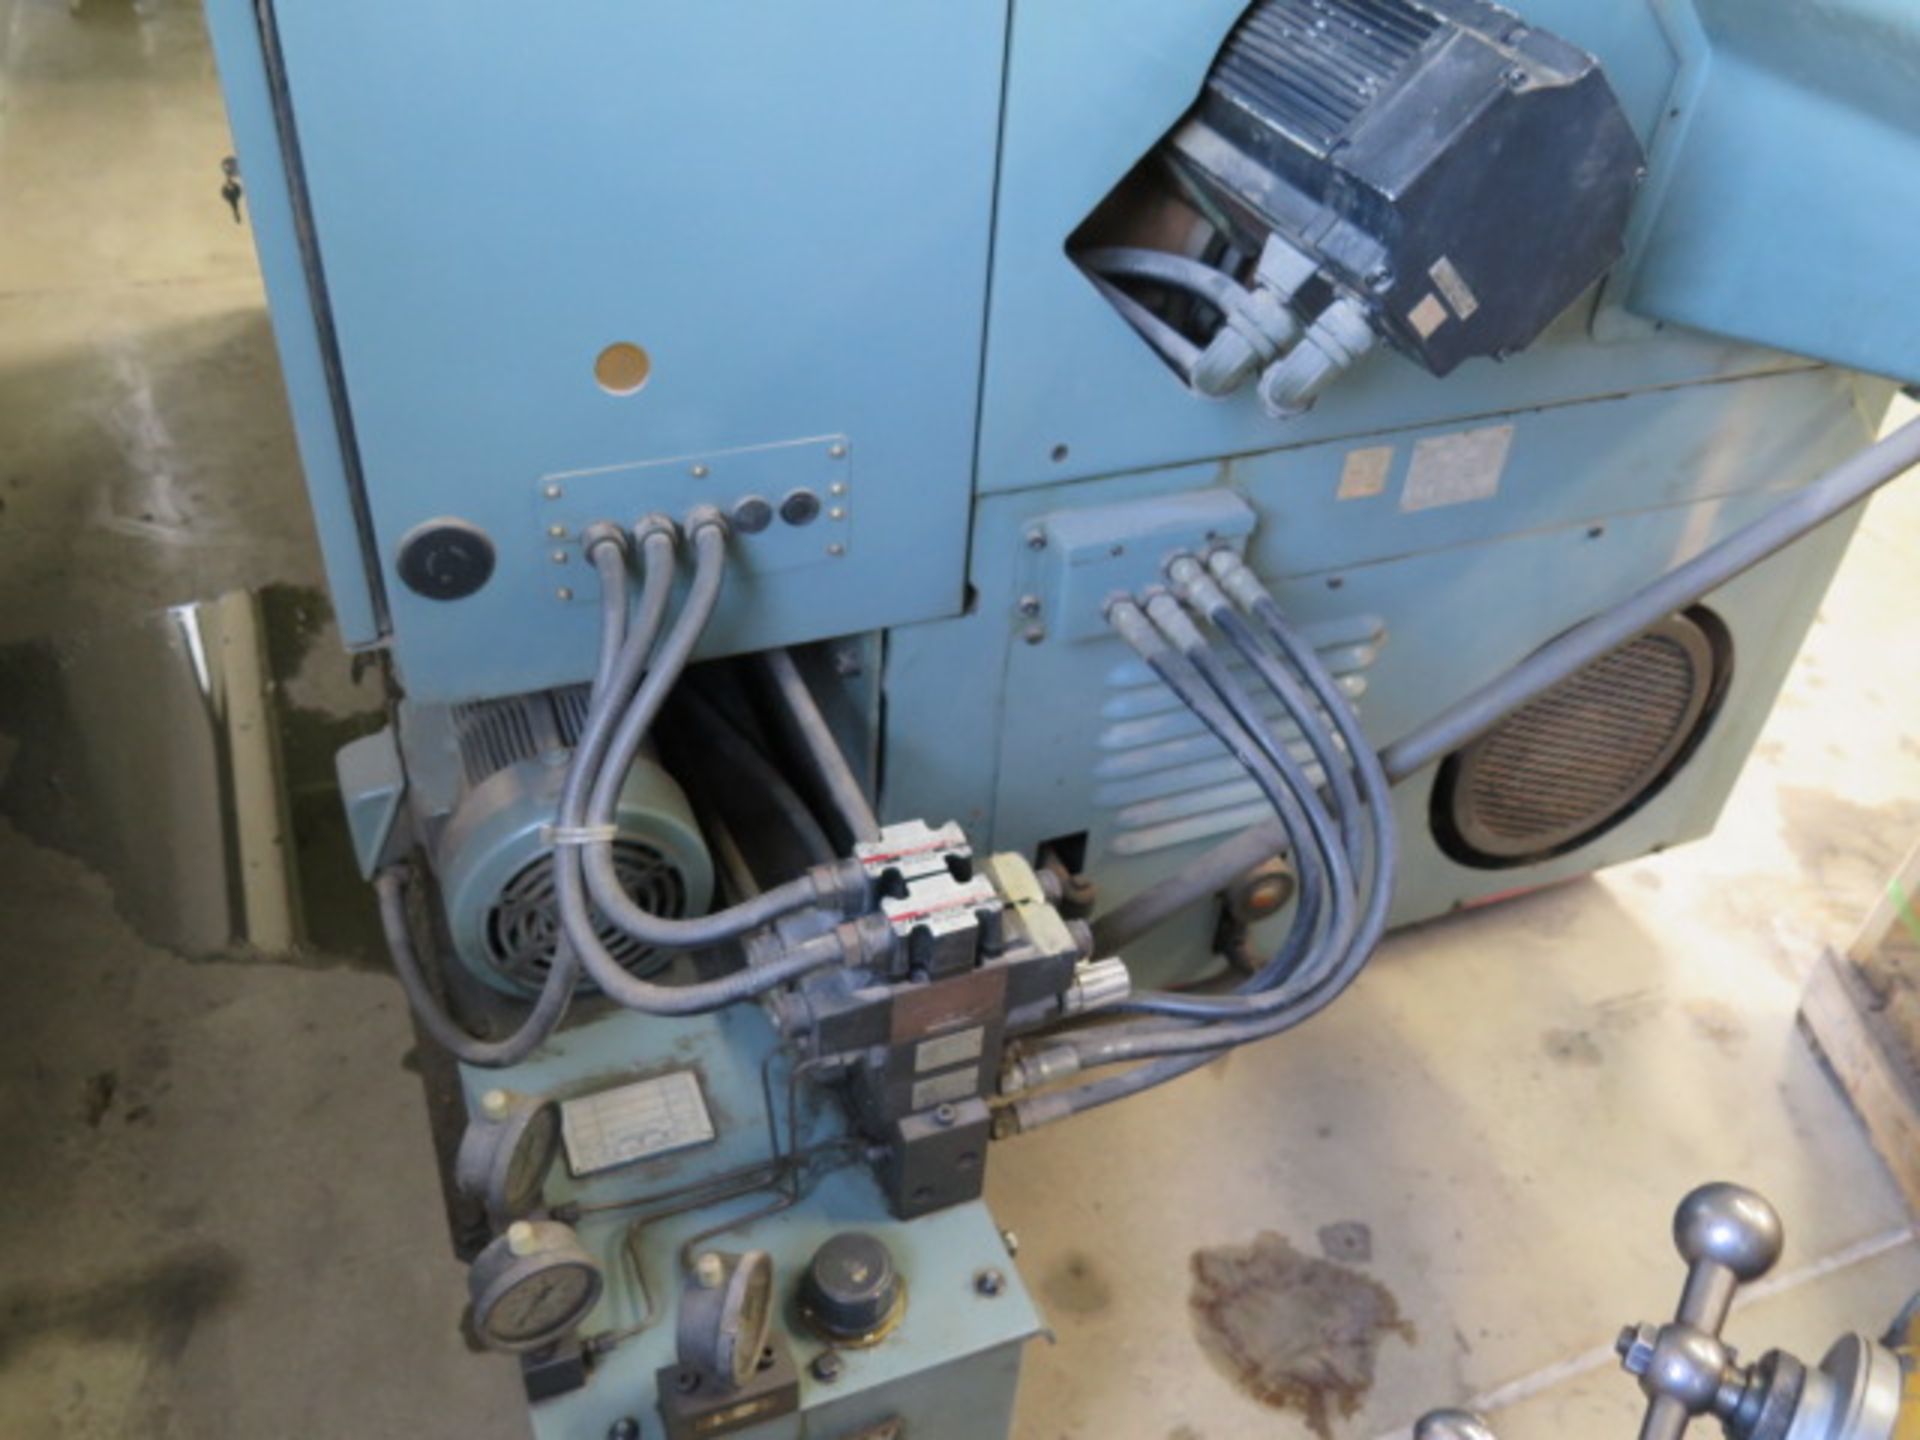 Mori Seiki SL-3H CNC Turning Center s/n 5331 w/ Yasnac Controls, 12-Station Turret, SOLD AS IS - Image 14 of 15